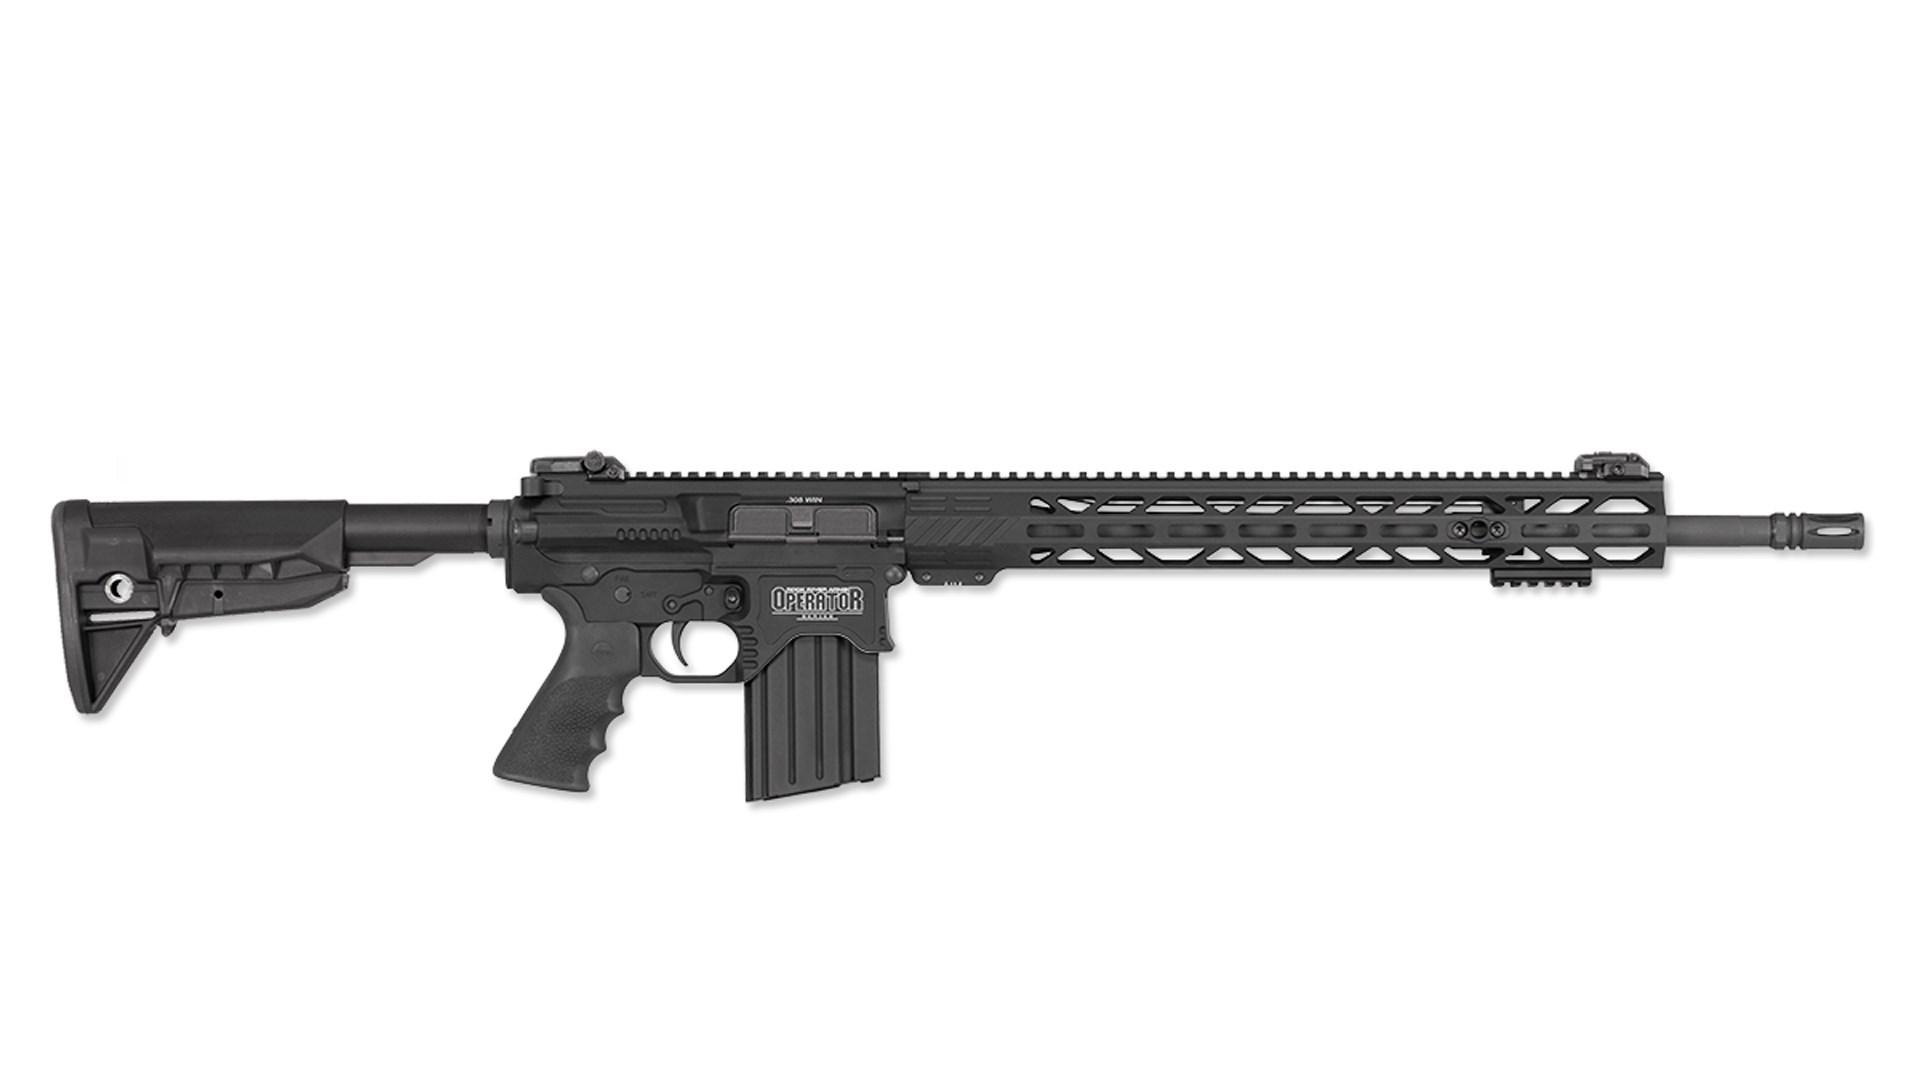 Right side of the RRA DMR Operator shown on white with a longer 20 inch barrel.